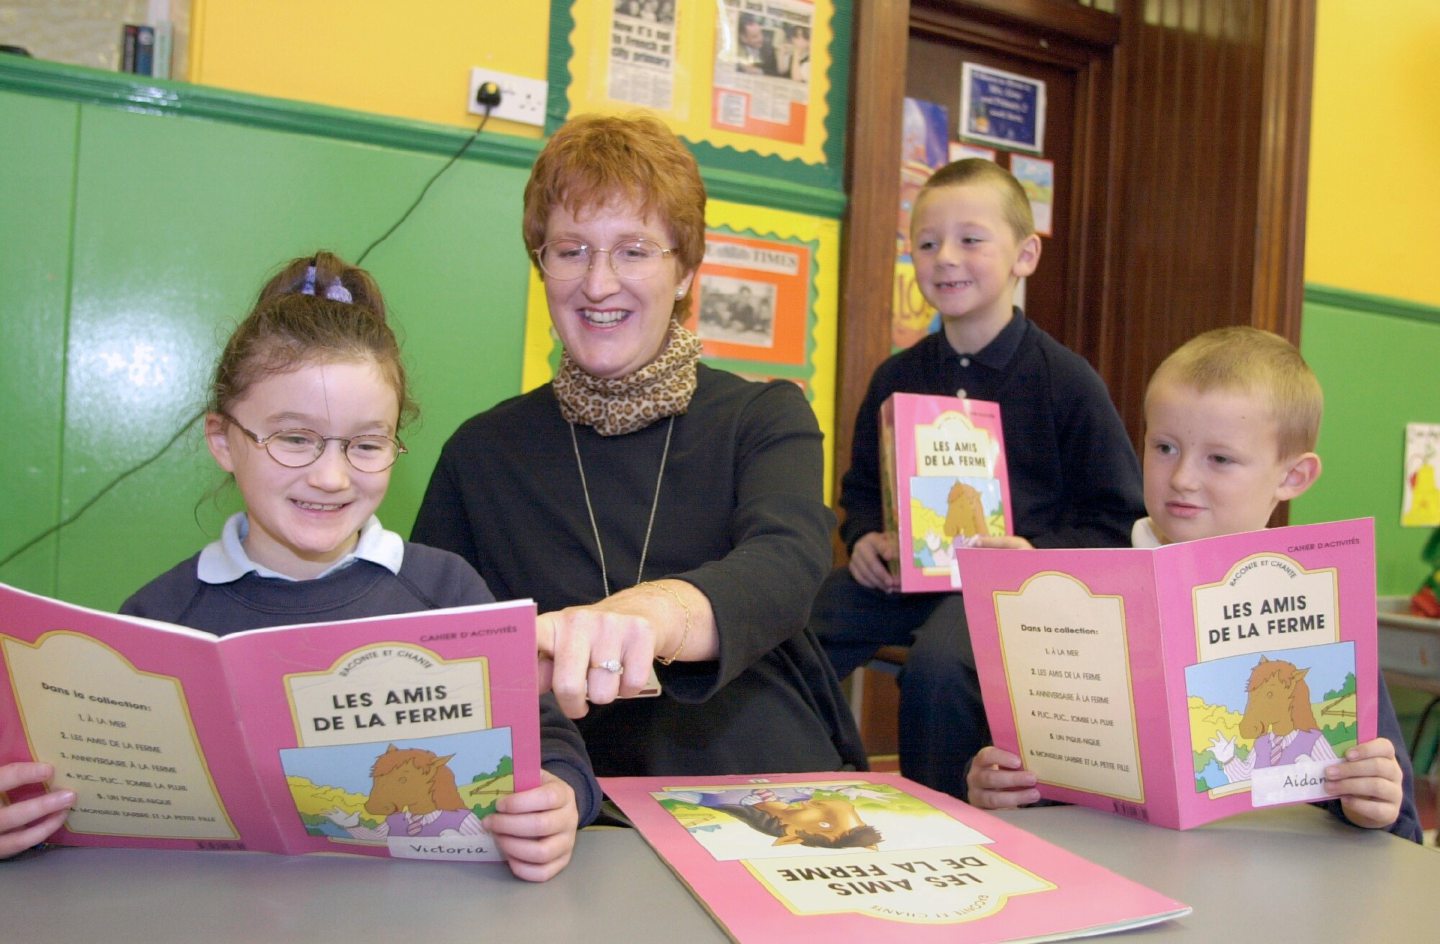 Primary pupils Victoria Craig, Stuart Dignan and Aiden Ross with teacher Sylvie Grigas during a French lesson in 2001.